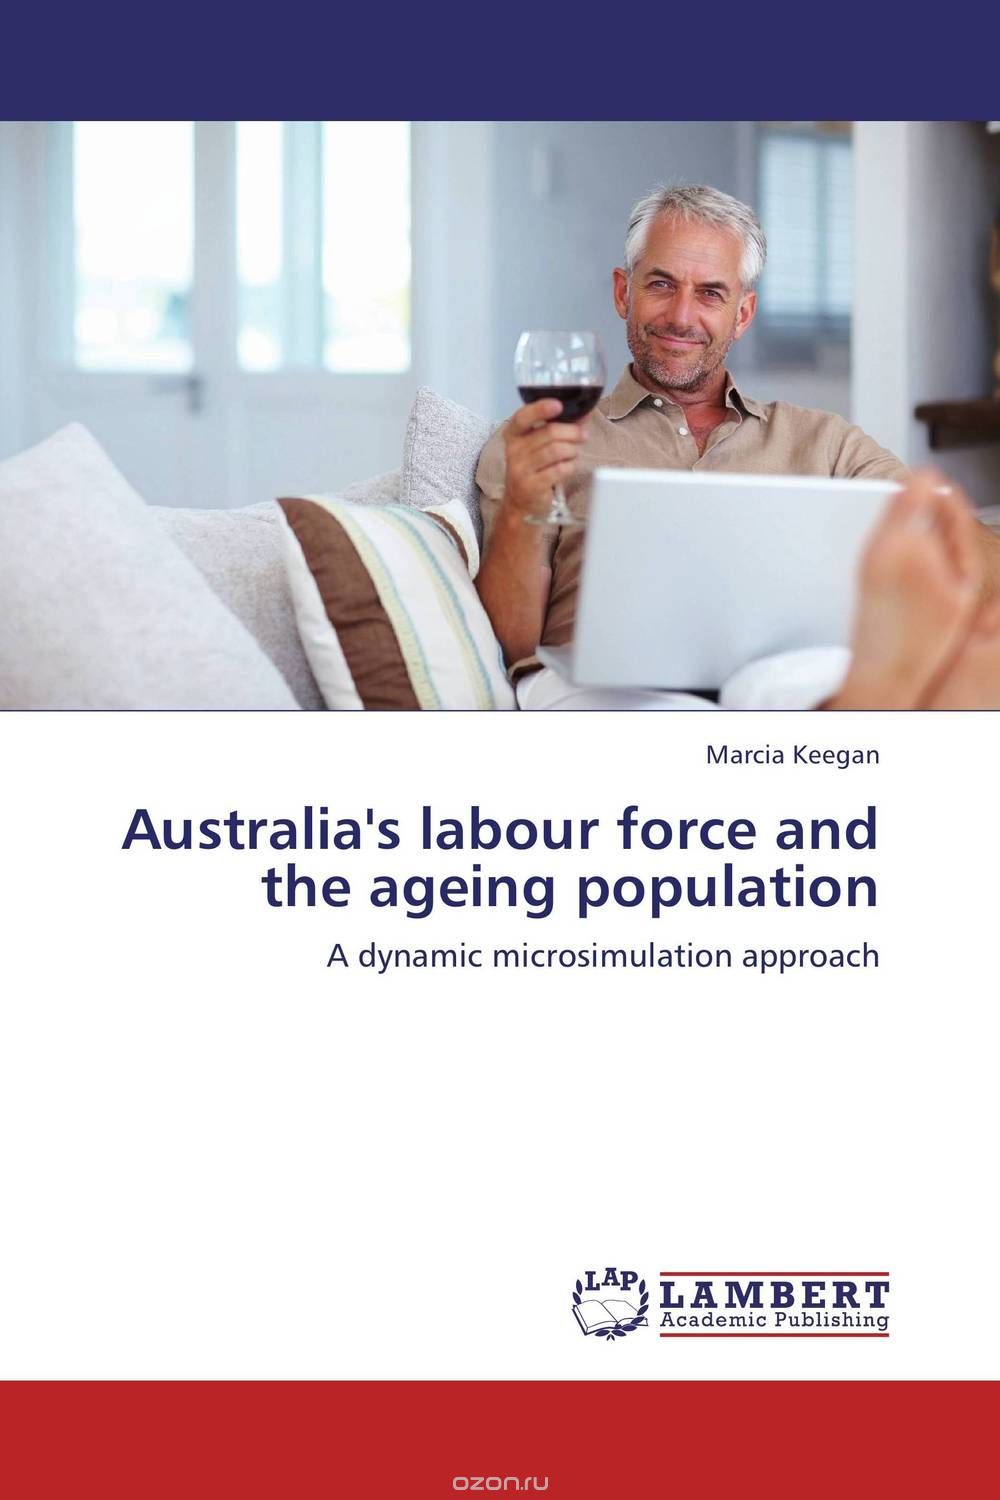 Australia's labour force and the ageing population